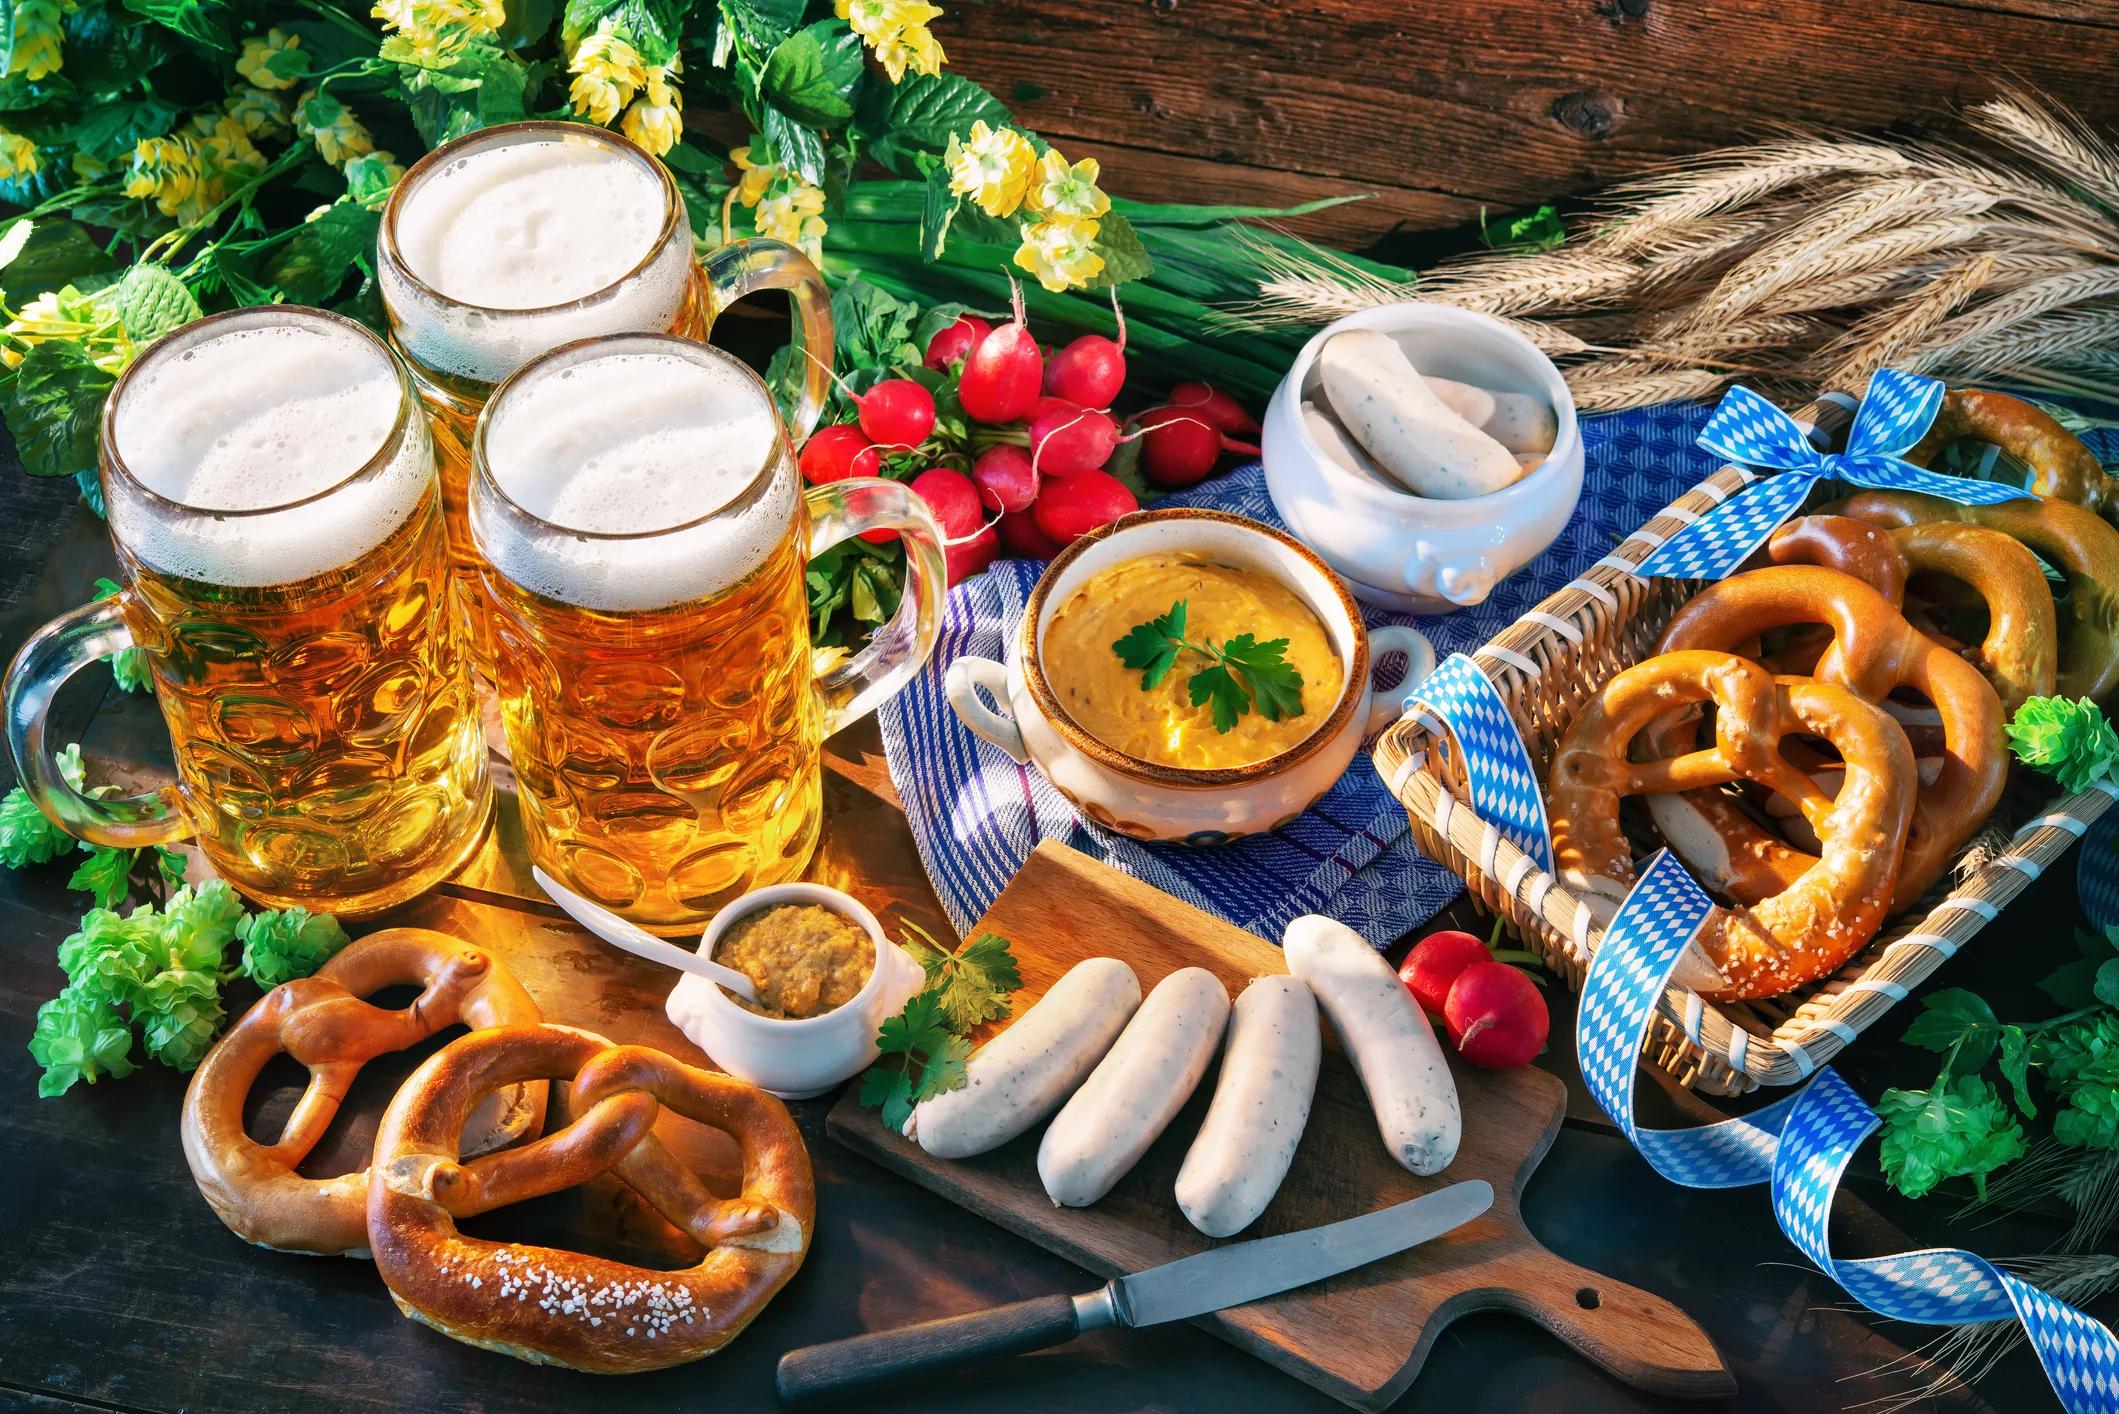 An assortment of delicious pretzels, sausages, dips and beer abourd a Main River Cruise